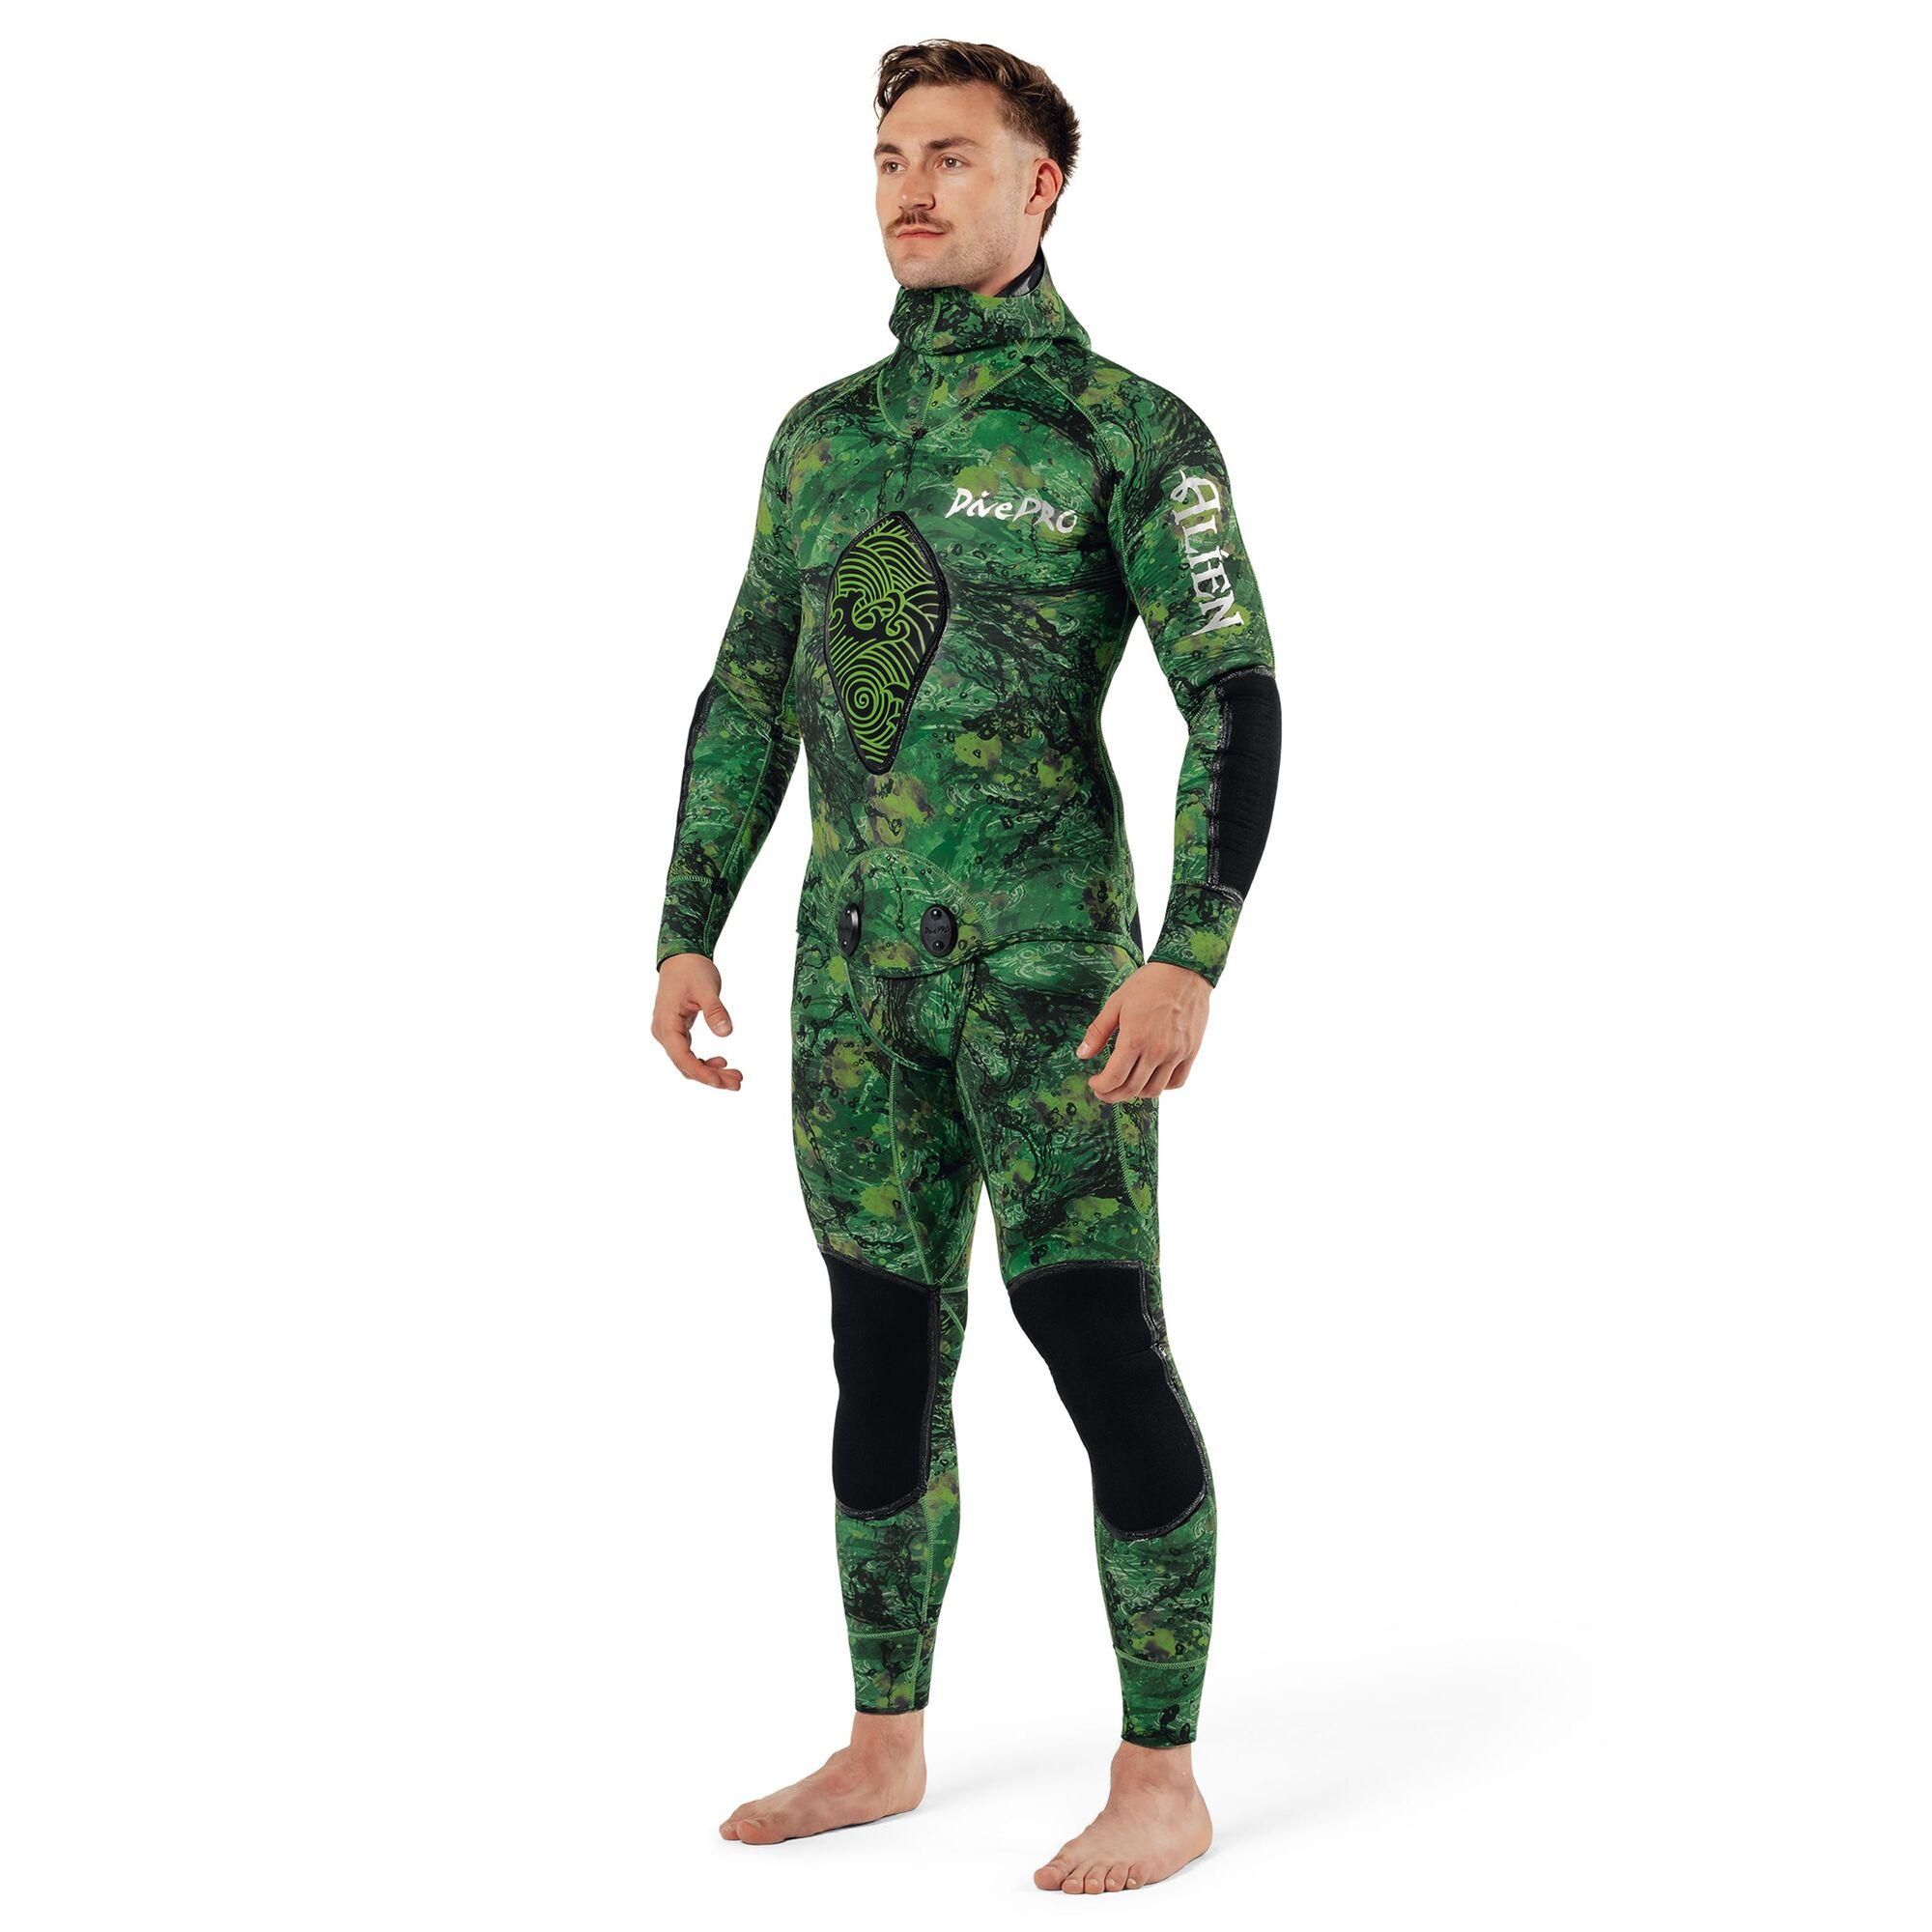 DivePRO Opencell Wetsuit Alien YAMAMOTO 39 5mm